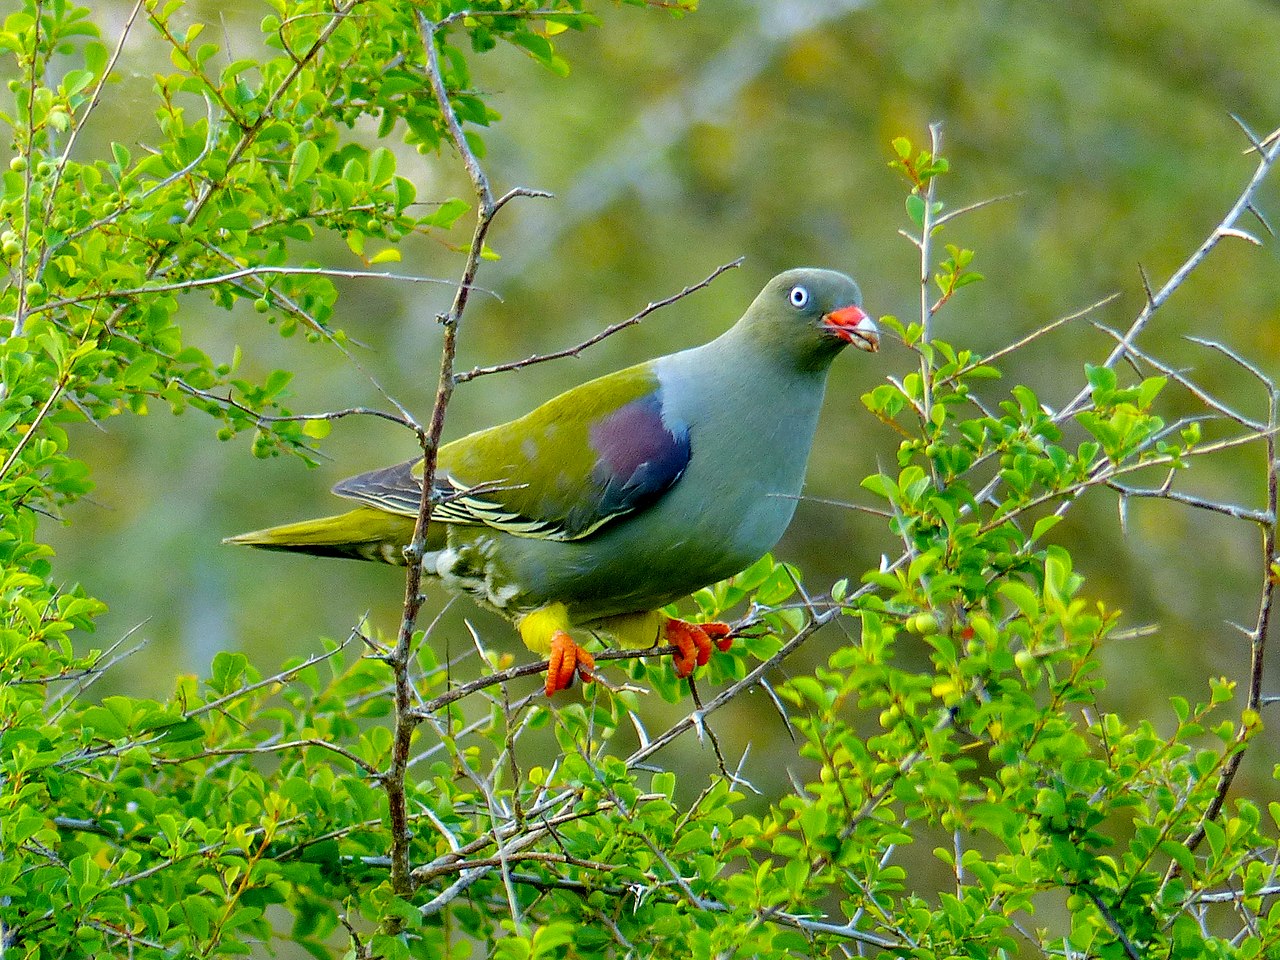 African Green-Pigeon wings are maroon with its red foot and a red beak with a white tip and have grayish-green to yellowish-green upperparts